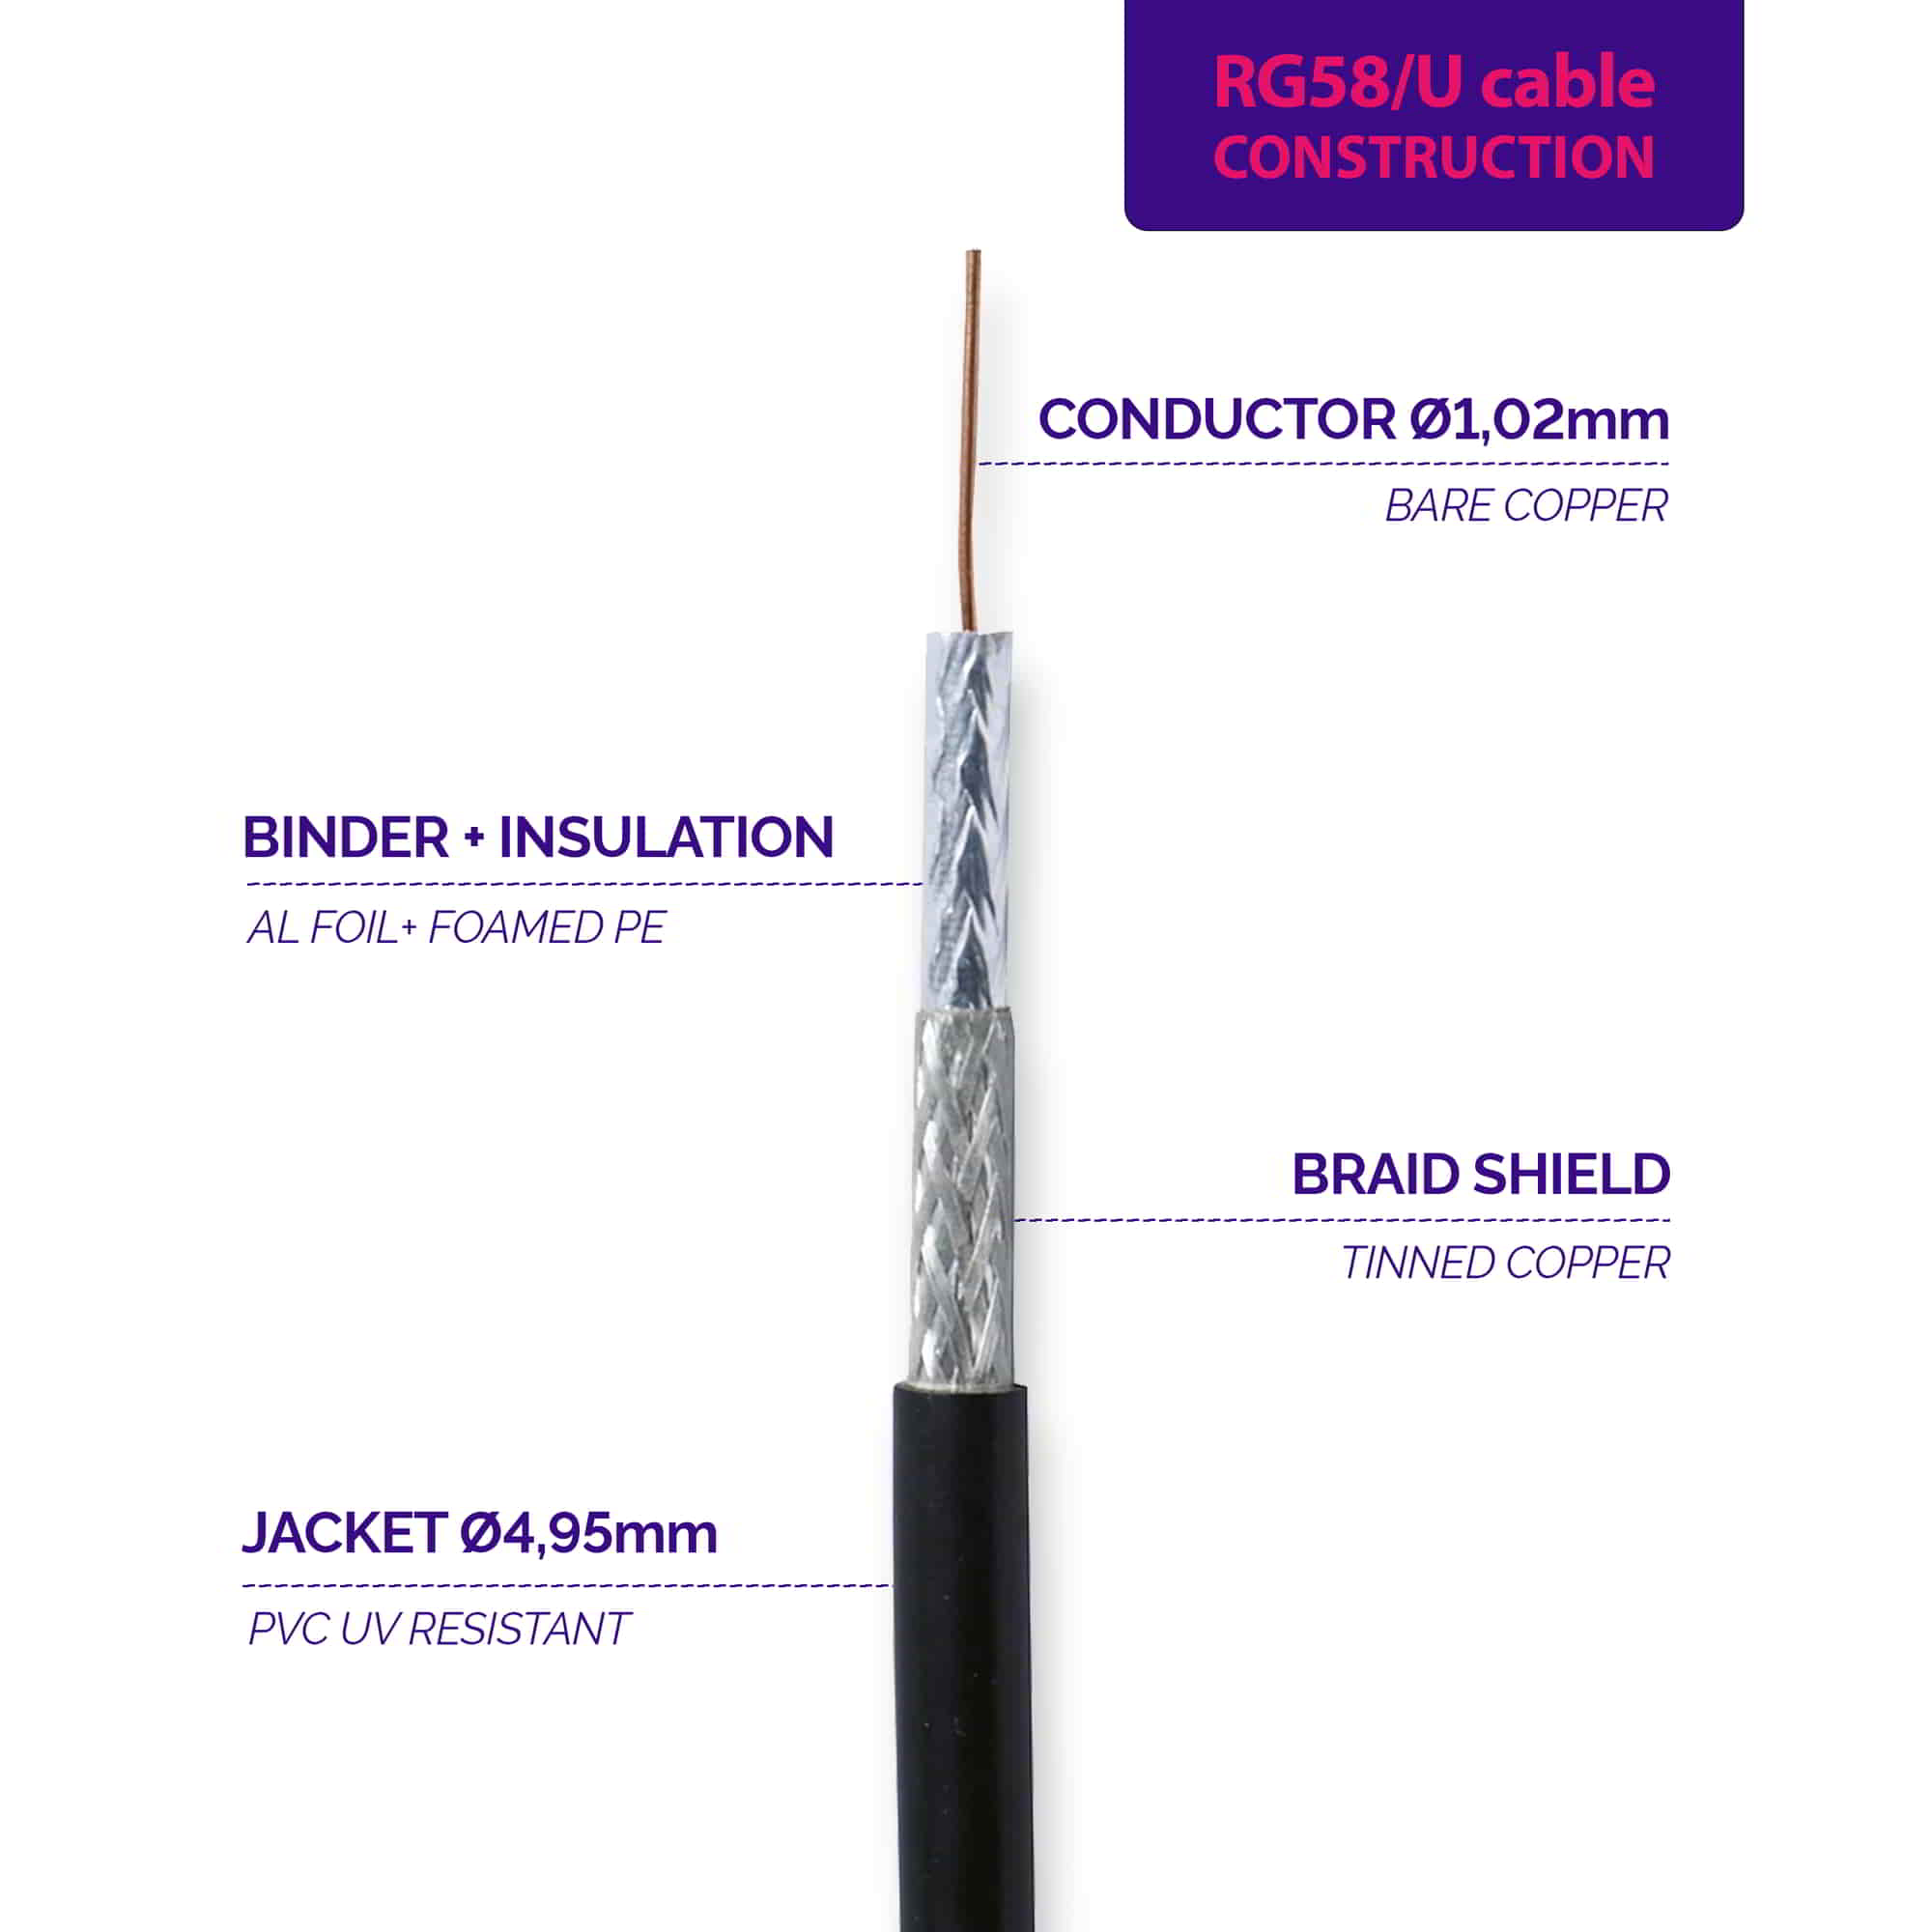 30 meters RG58/U Coaxial Cable, Pure Copper conductor, PVC jacket